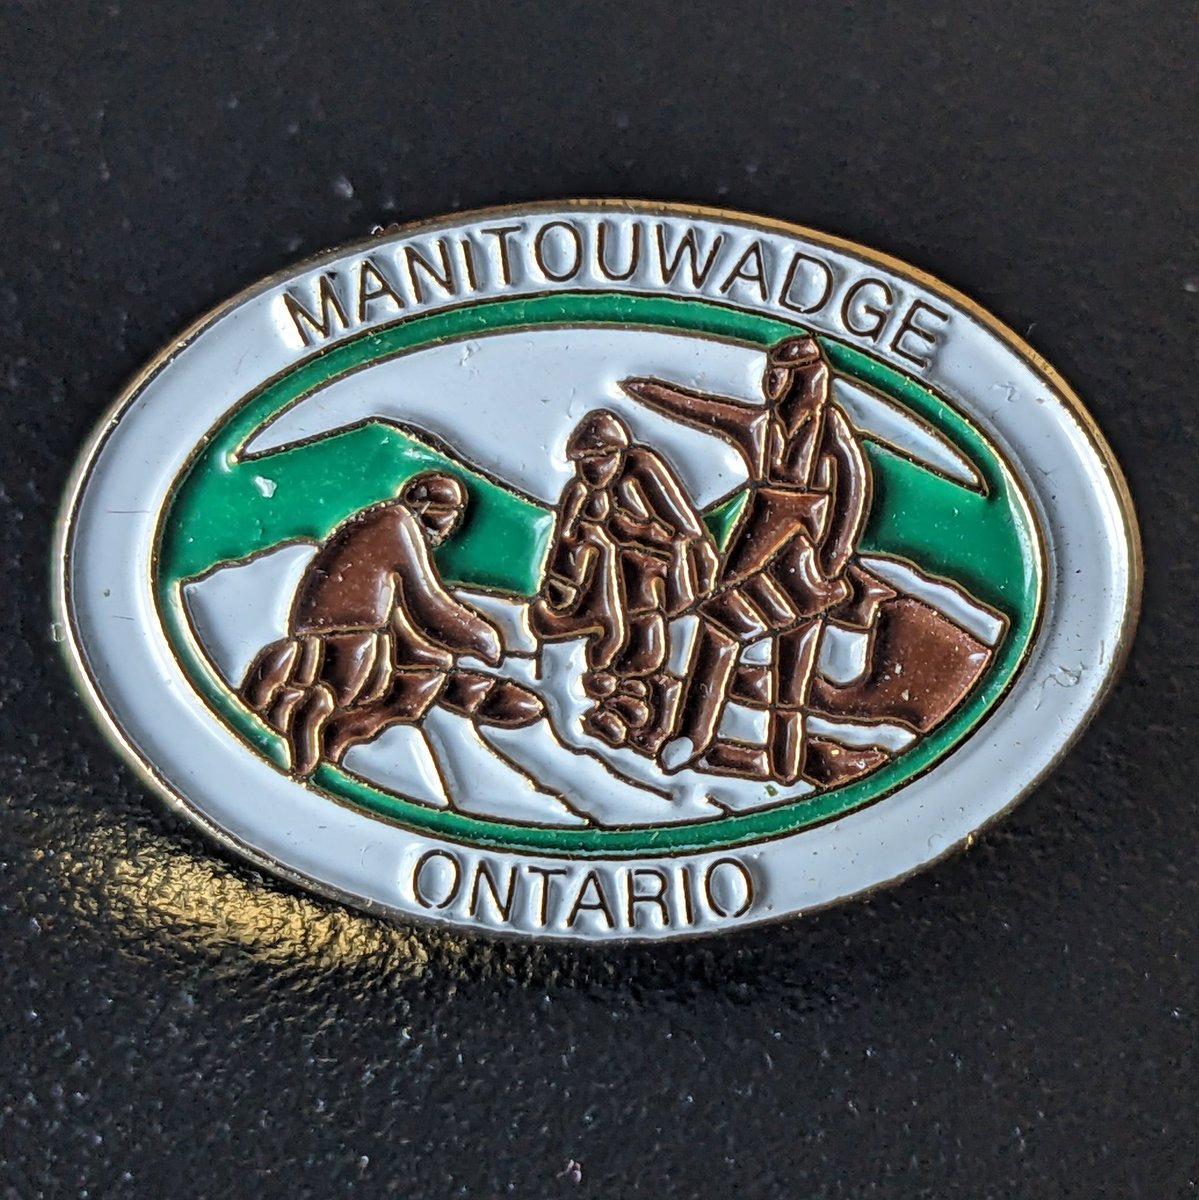 Manitouwadge comes from the Ojibwa for “cave of the great spirit”. The three prospectors on the logo are Roy Barker, Bill Dawd, and Jack Forster who found mineral deposits in the area.

#PinQuestON #onmuni #ontario #canada #onheritage #placenames #manitouwadge @Manitouwadge